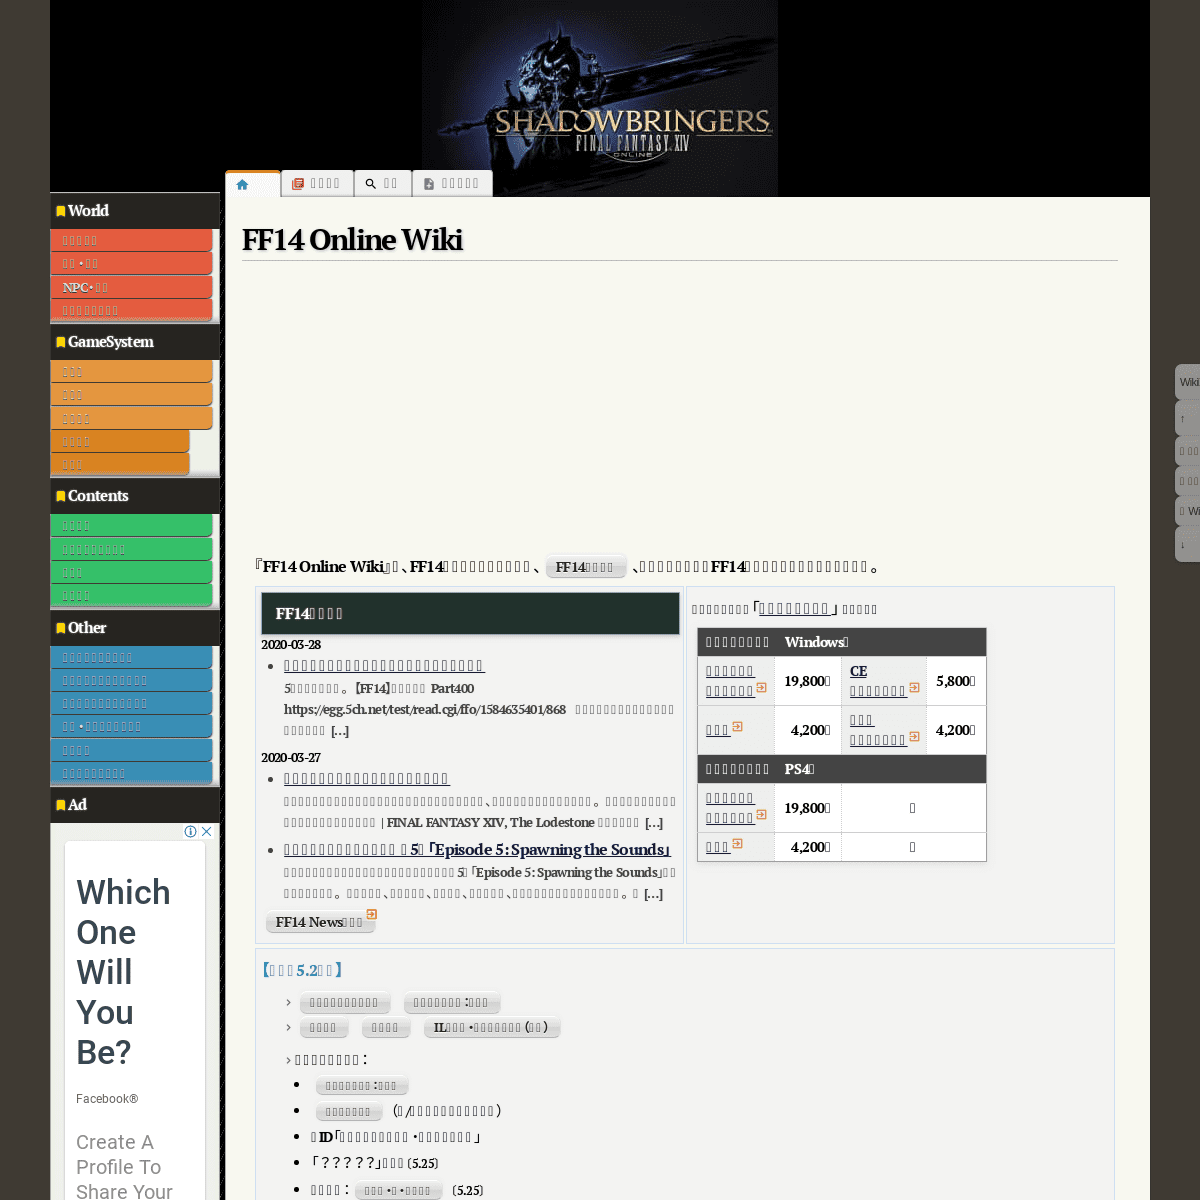 A complete backup of ff14wiki.info